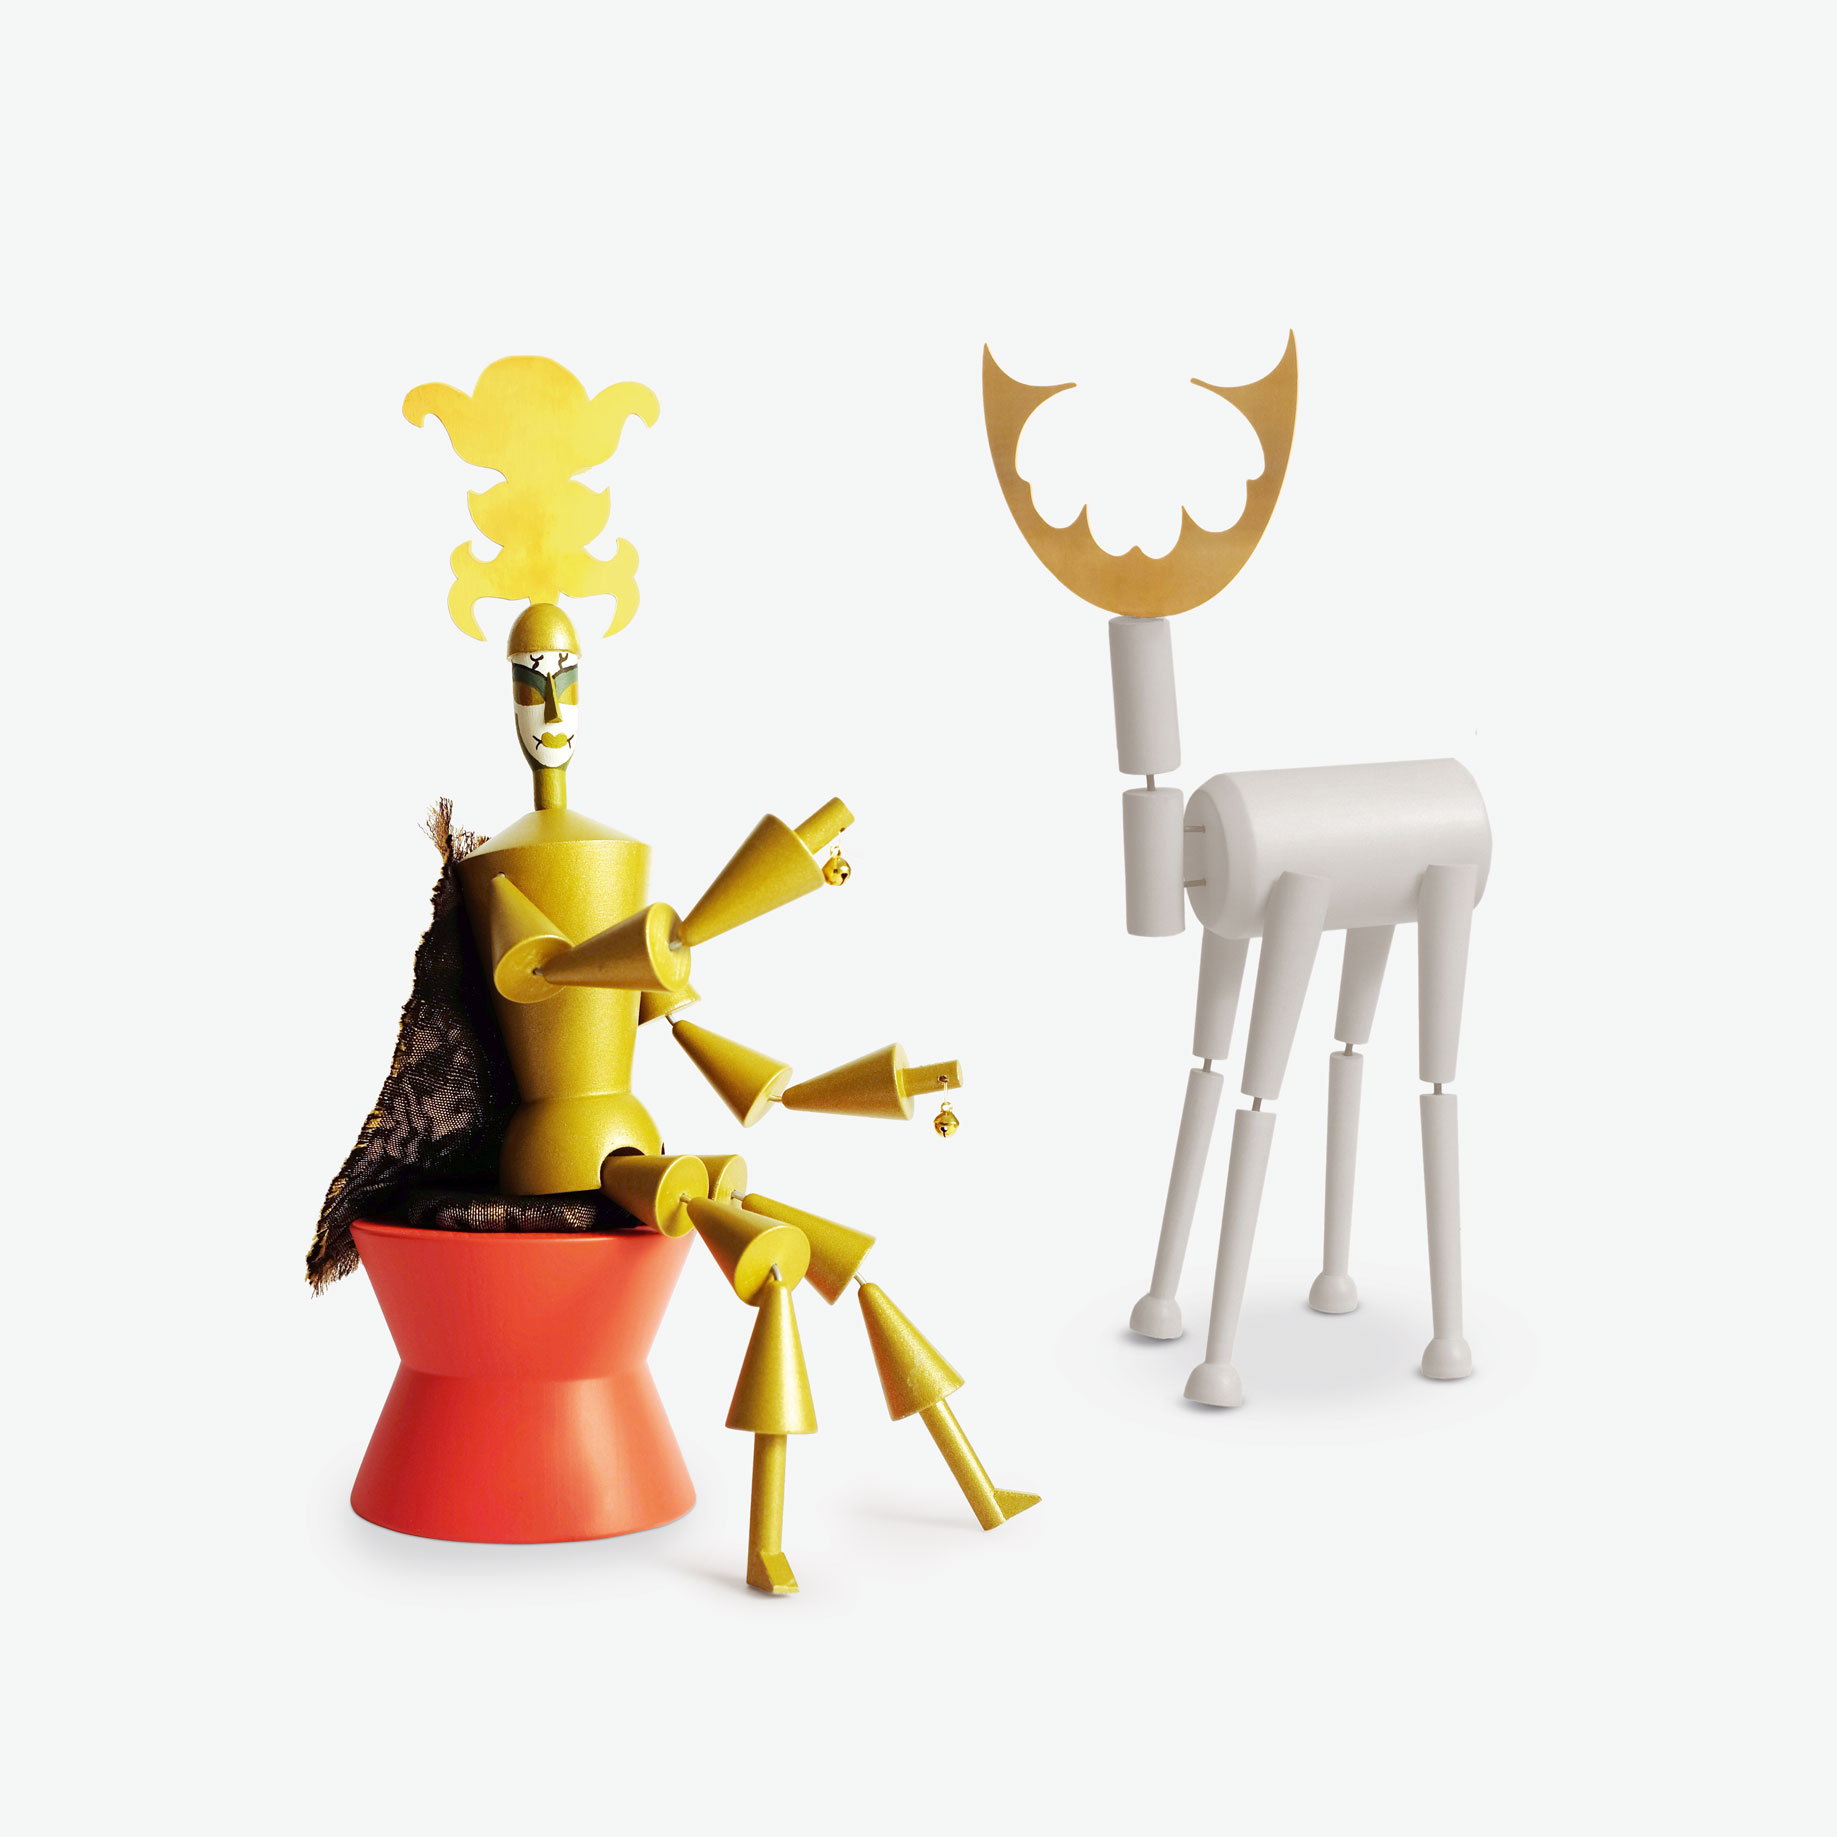 Cool Designs for Cultured Kids – Dada Marionettes